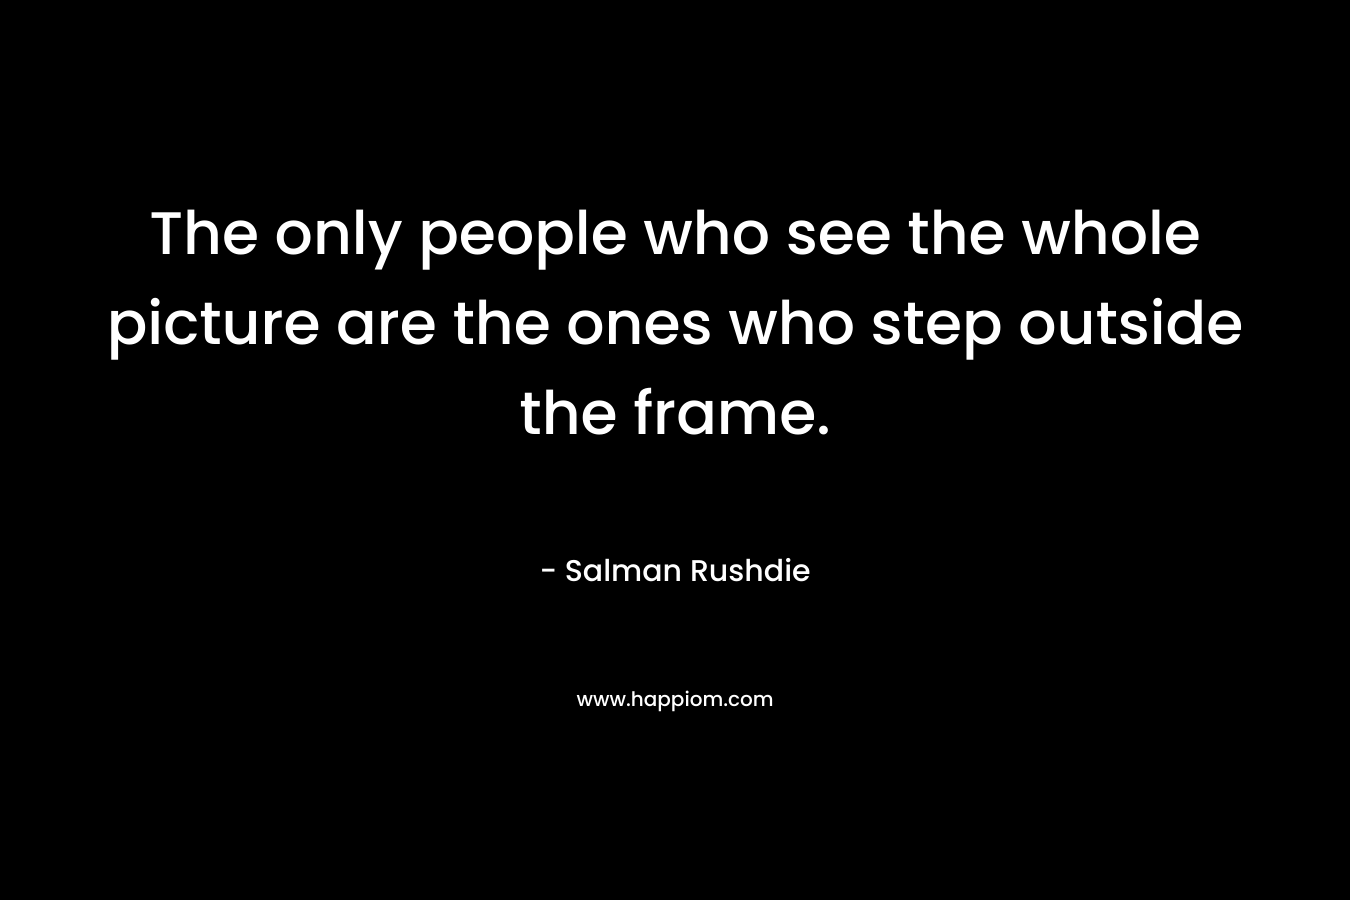 The only people who see the whole picture are the ones who step outside the frame. – Salman Rushdie